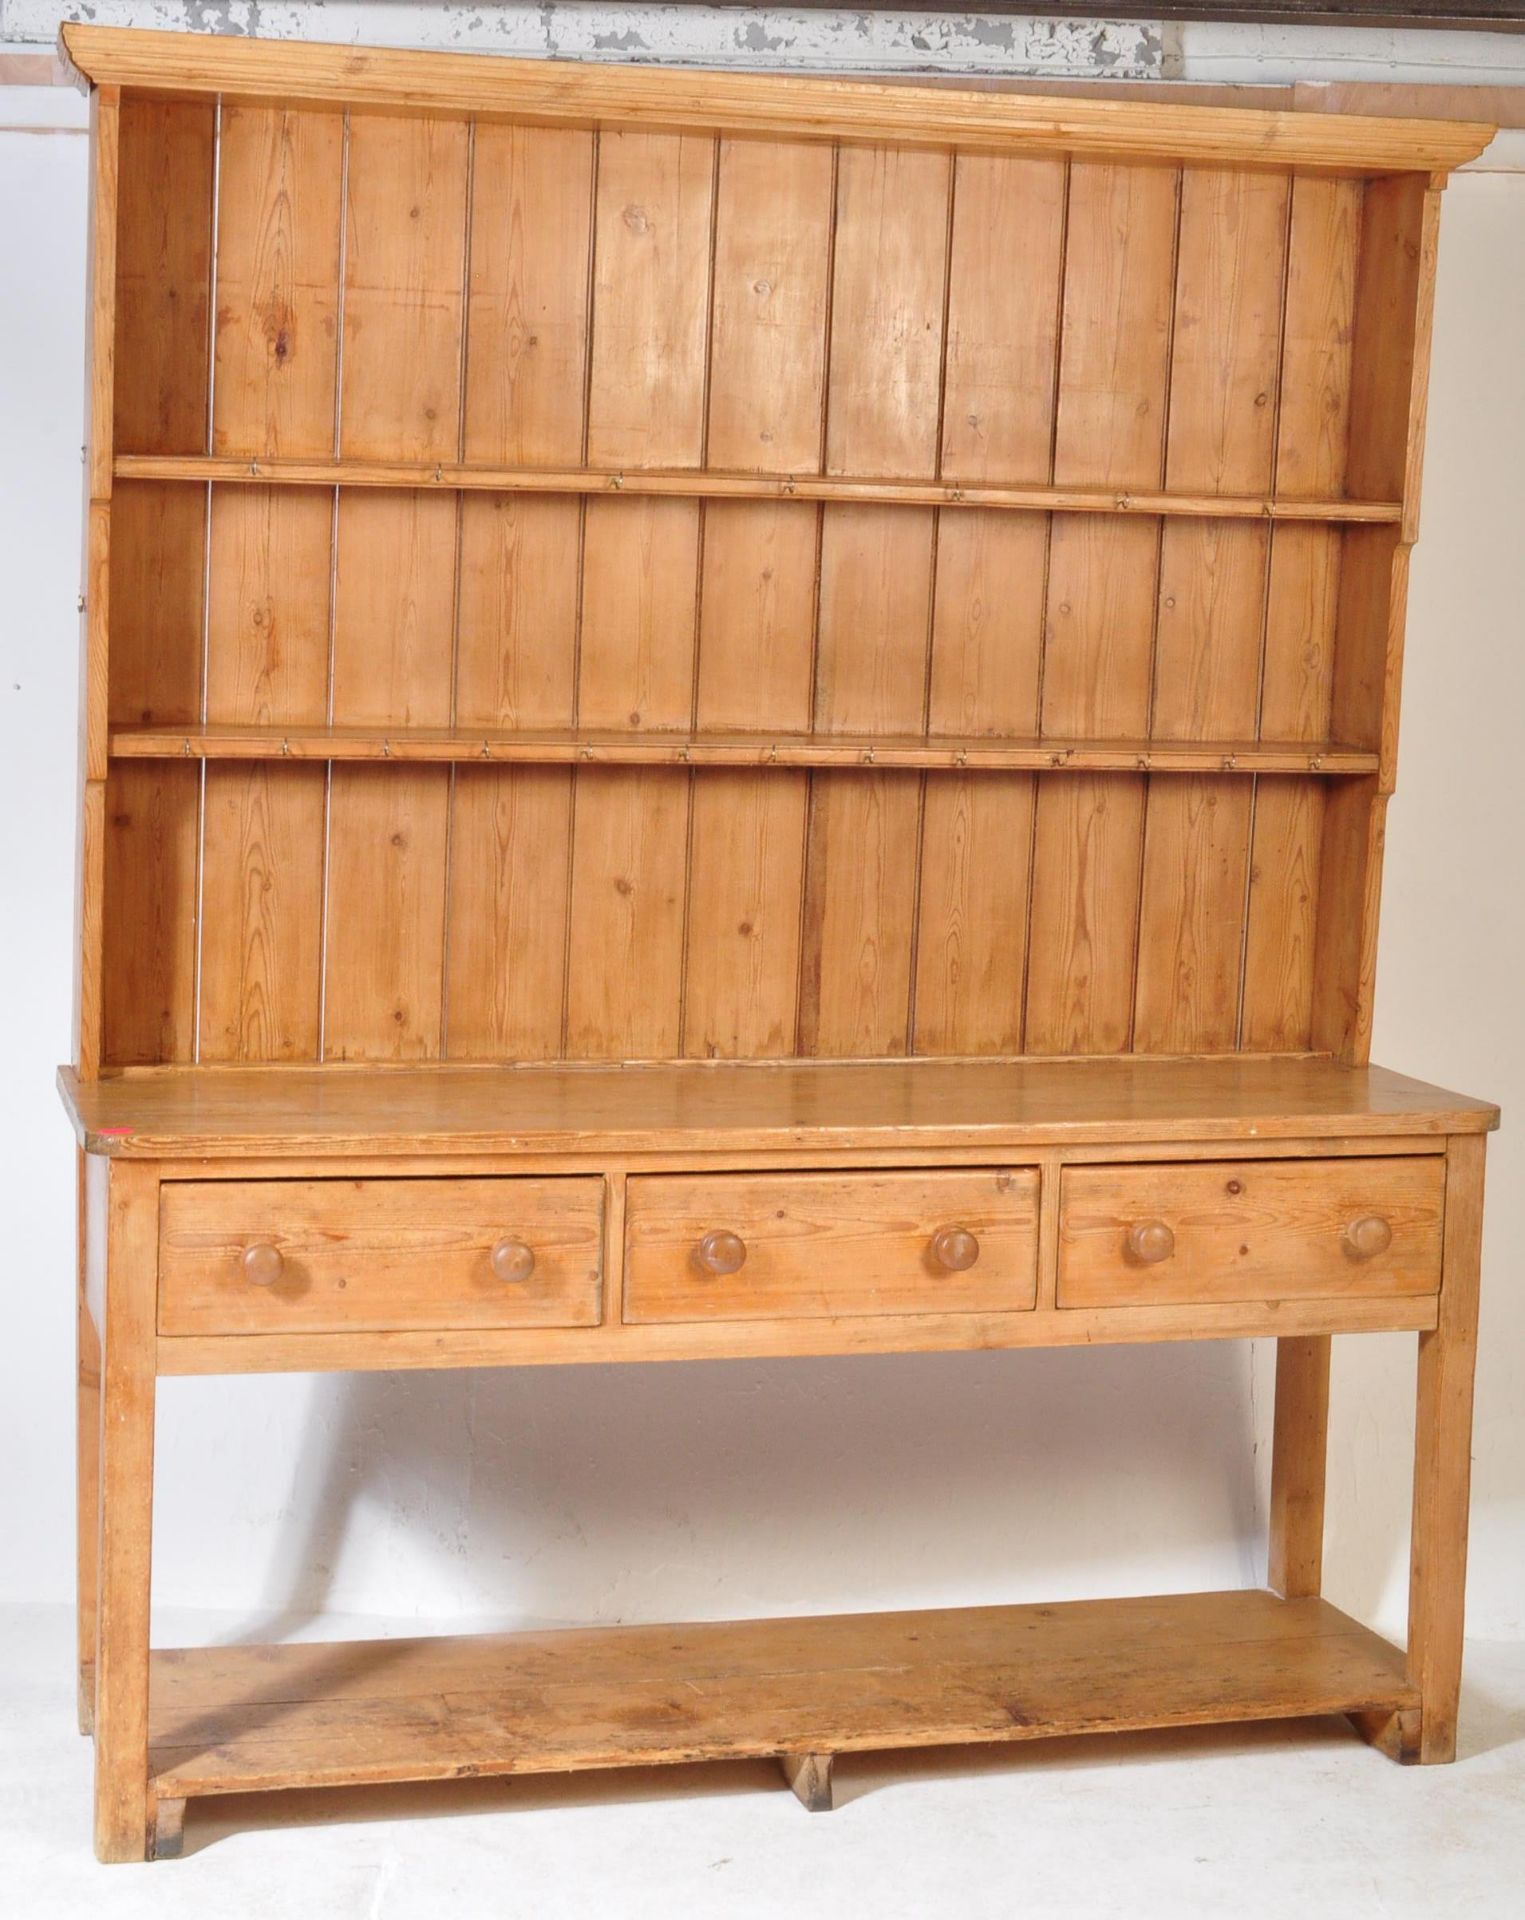 LARGE 19TH CENTURY VICTORIAN PINE WELSH COUNTRY DRESSER